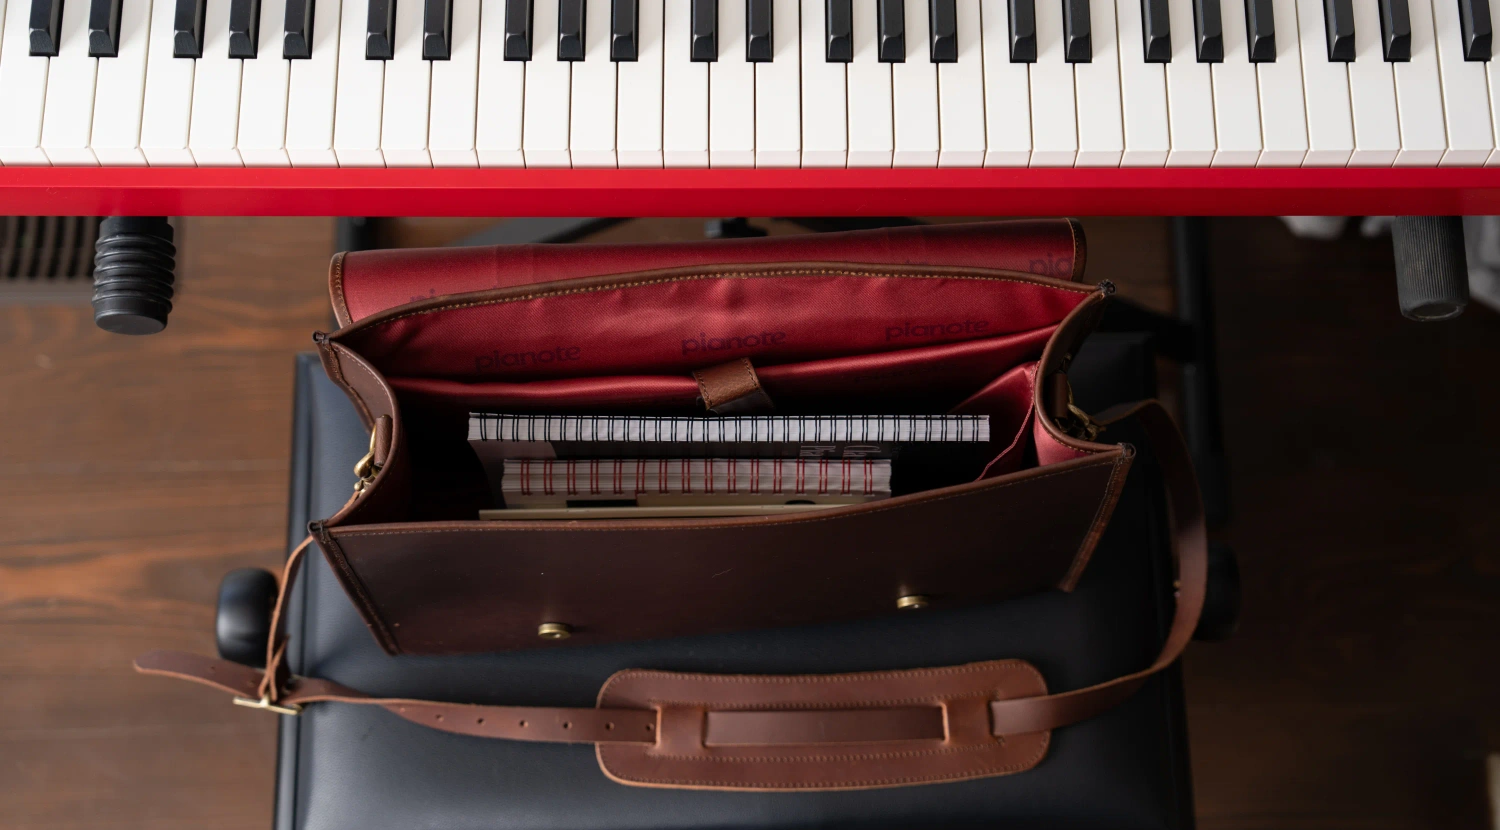 Stack of music sheets neatly organized inside The Pianote BookBag.